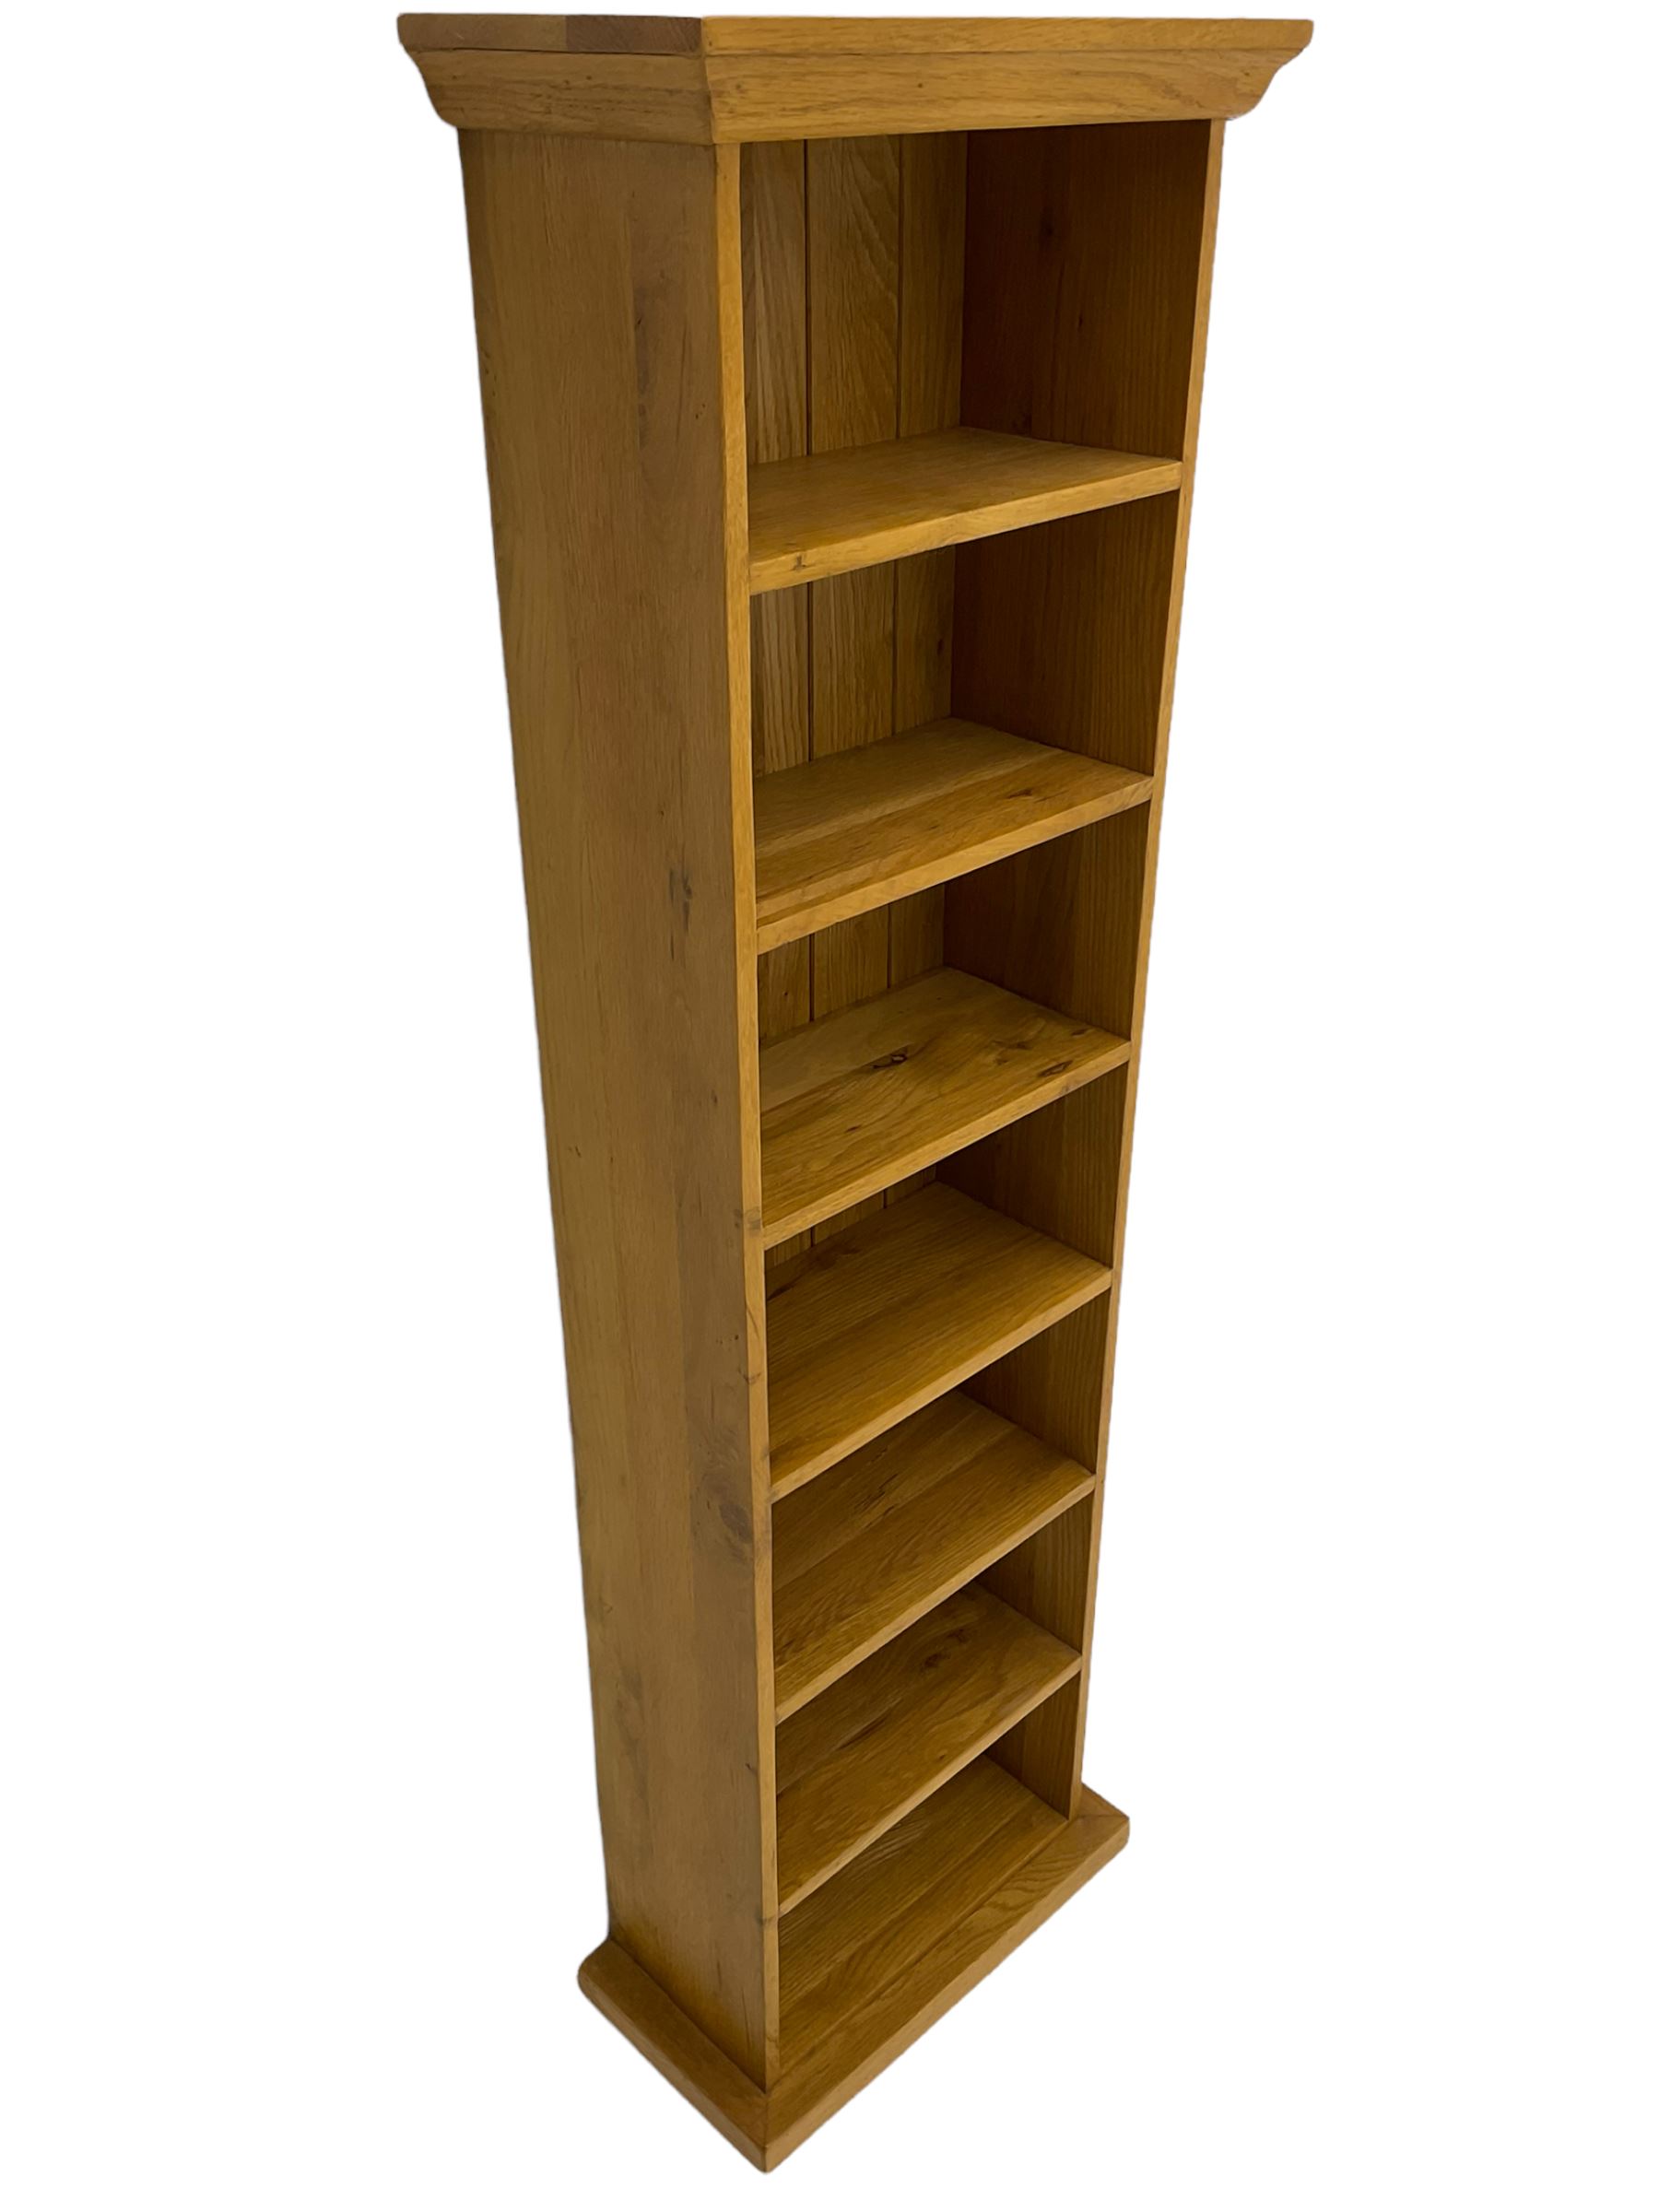 Small solid light oak open bookcase - Image 3 of 4